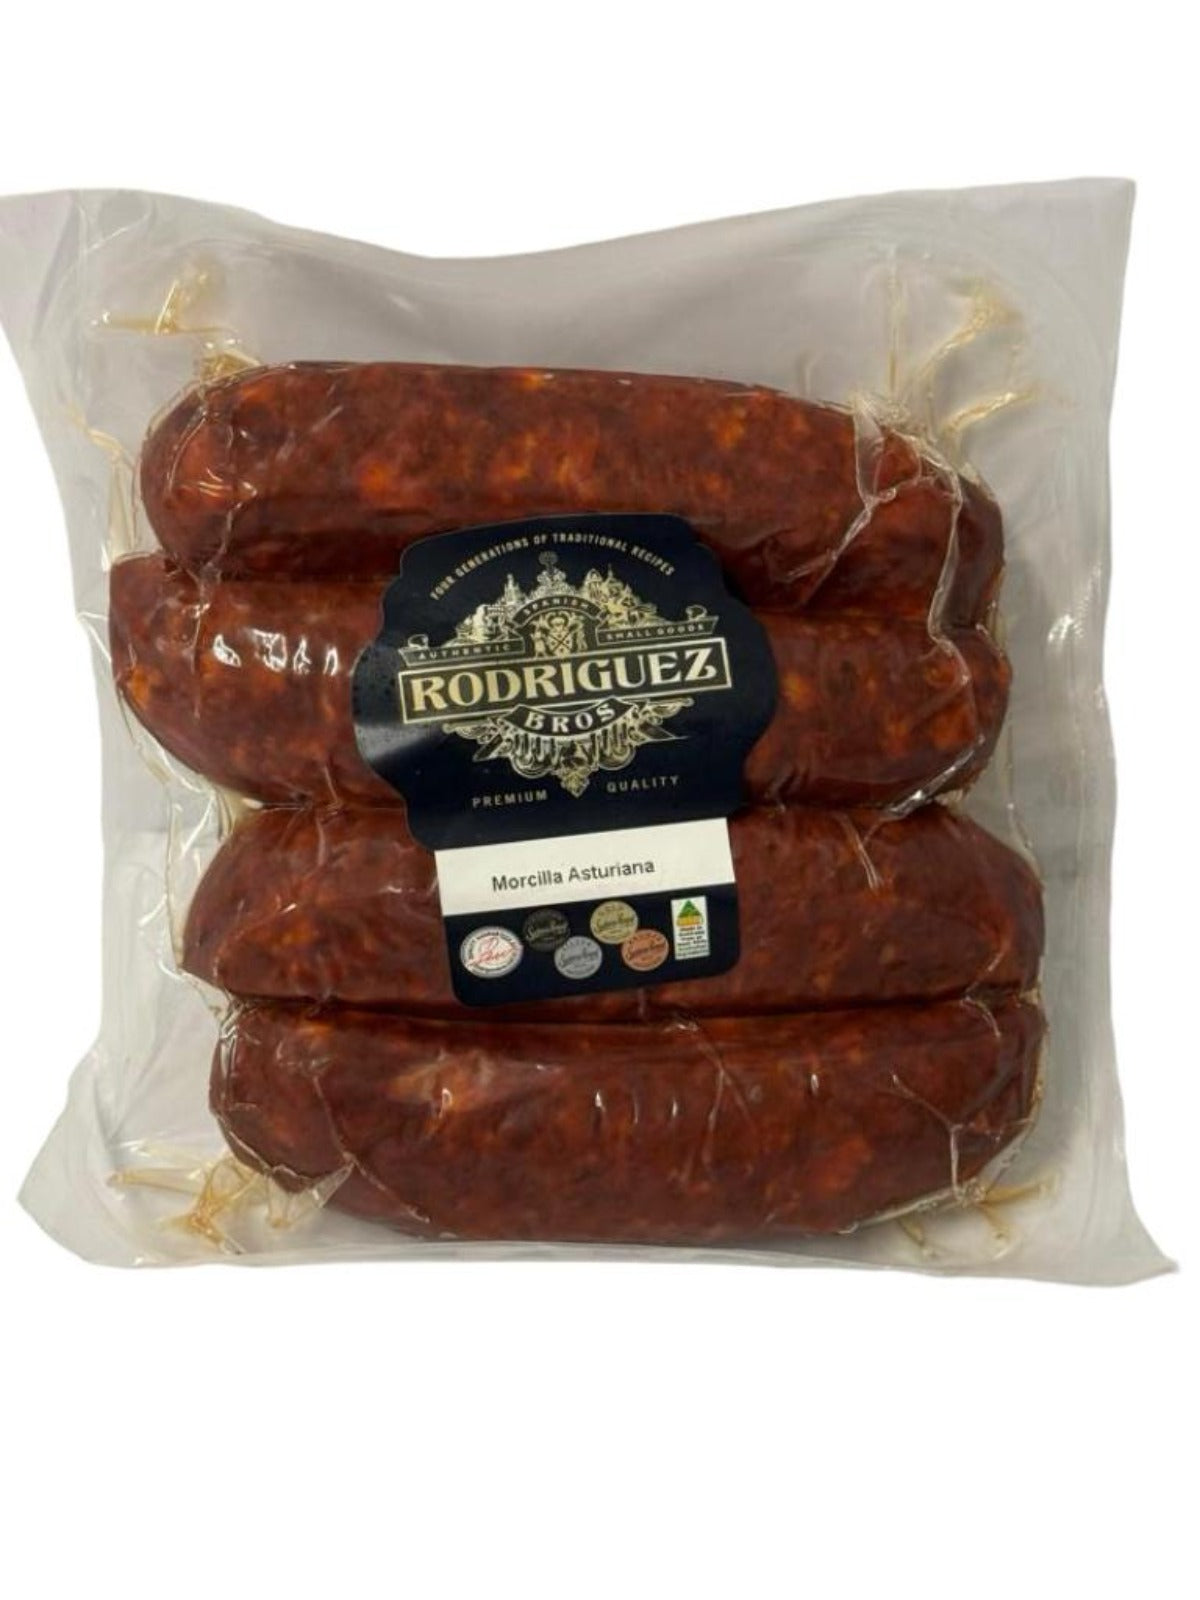 Spanish Morcilla Asturiana Black Pudding (Onion) 4 piece pack 4 piece pack random weight approx 385g packet. Regular price $10.00 AUD [You are guaranteed to receive at least 370g of product, equivalent price of $27.03 per kg.]